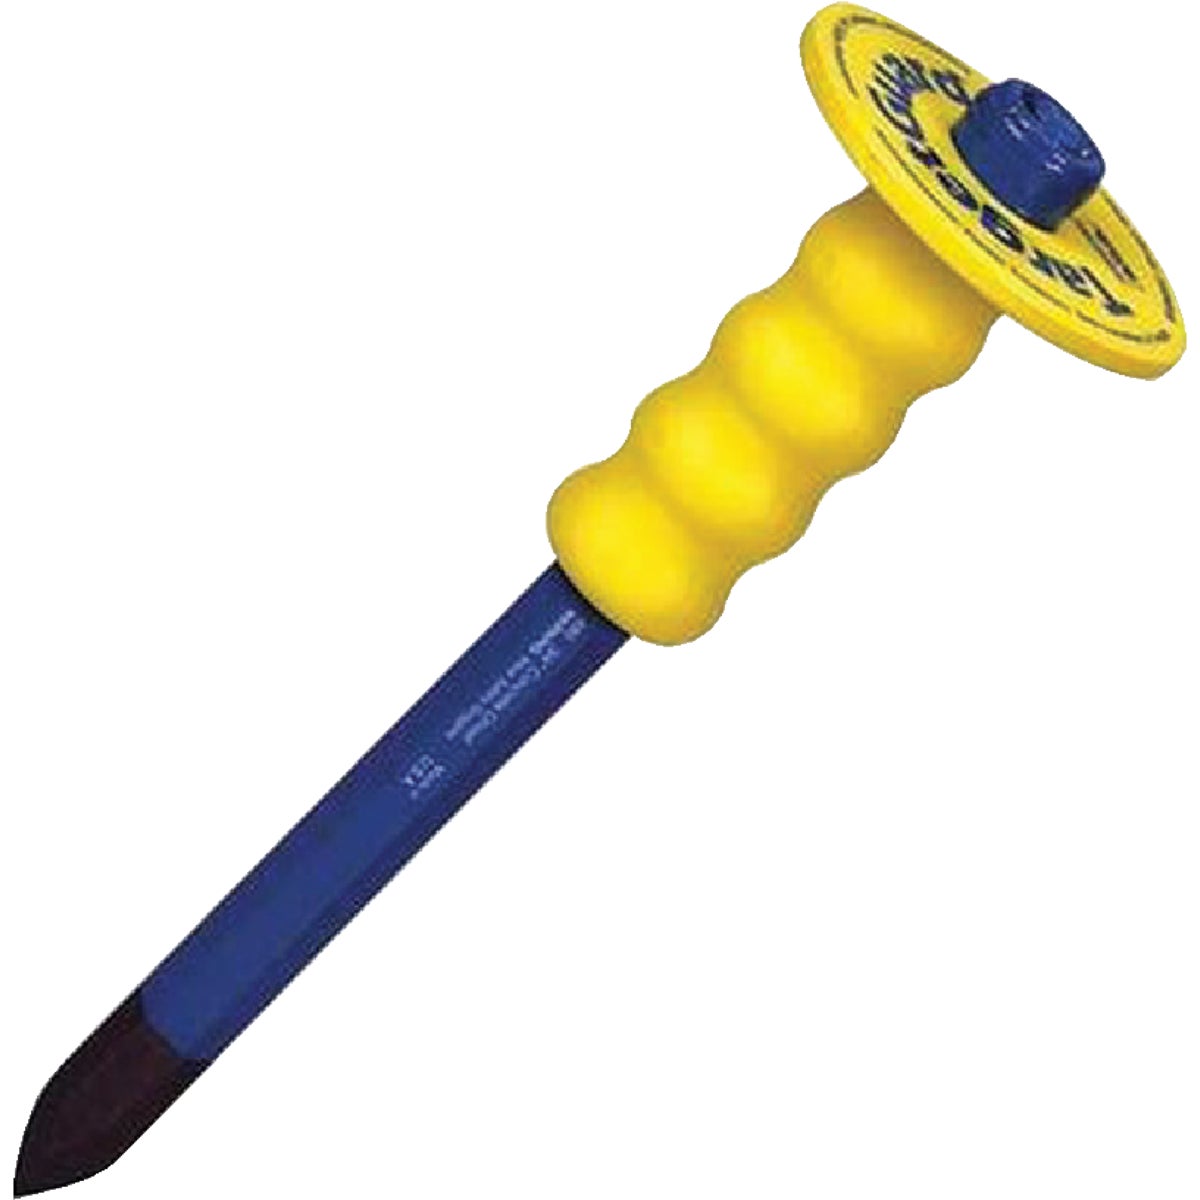 Item 368679, Durable, yellow plastic guard is permanently molded to steel tool to 